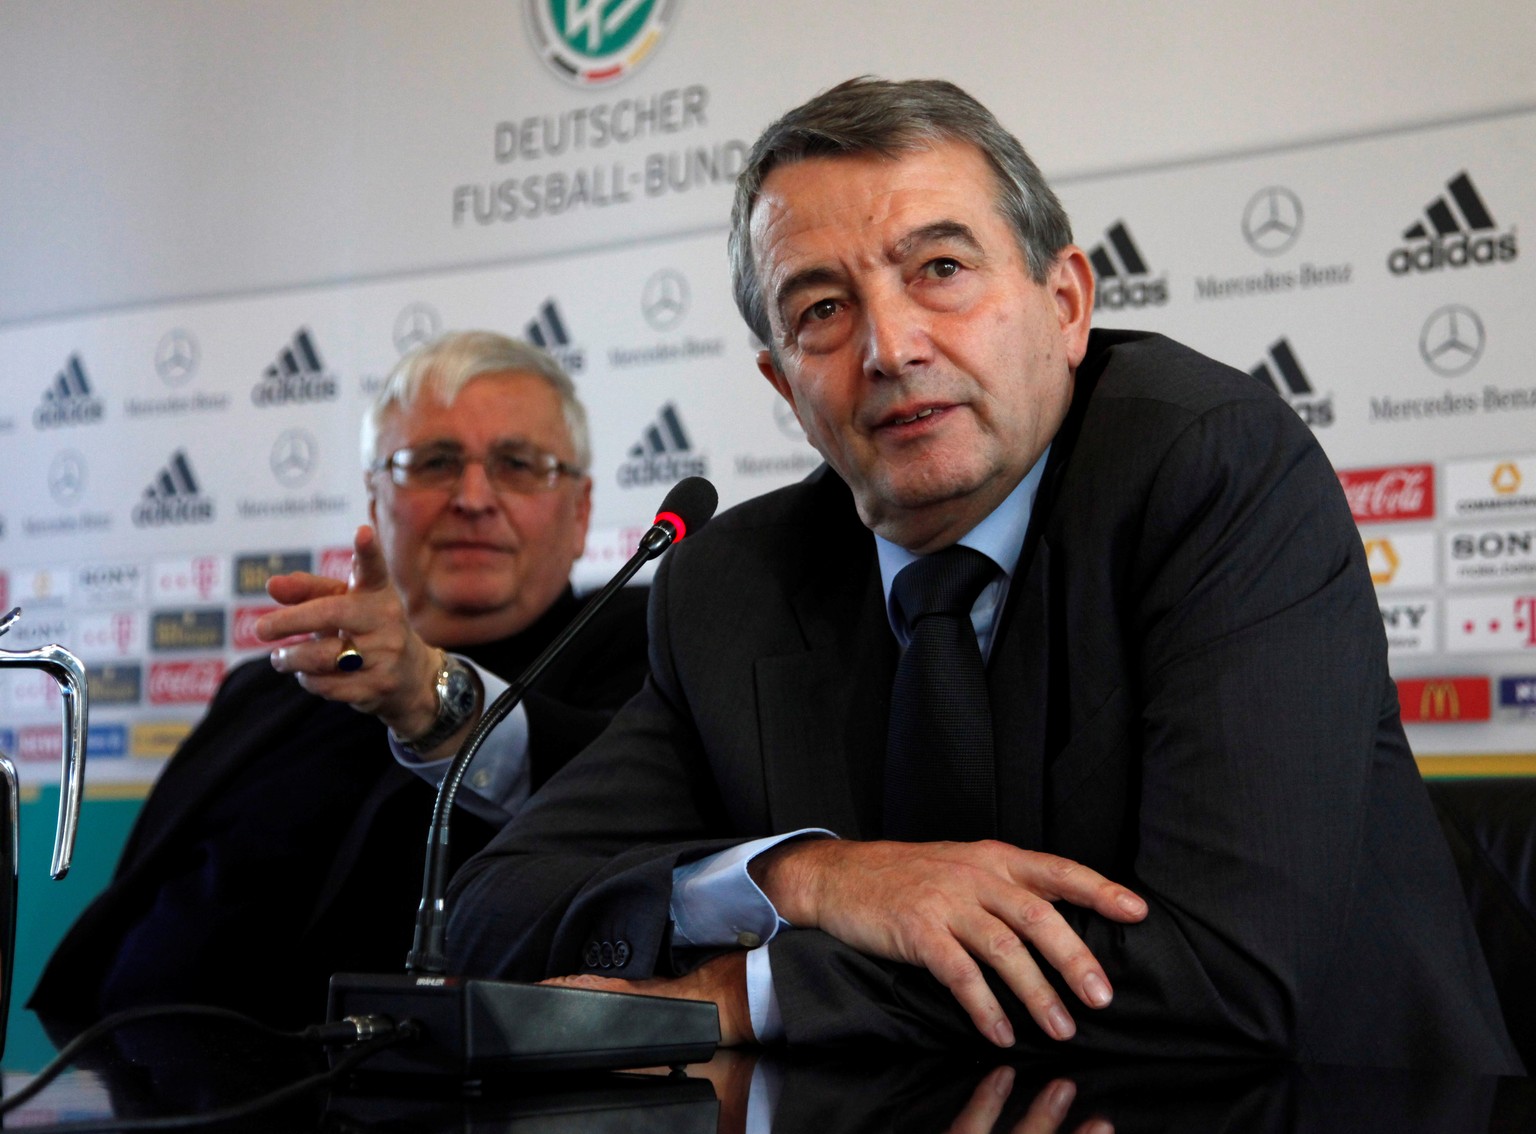 FILE PHOTO: Wolfgang Niersbach (R), general secretary of the German soccer association (DFB) and designated successor of DFB president Theo Zwanziger (L) hold a news conference at the DFB headquarters ...